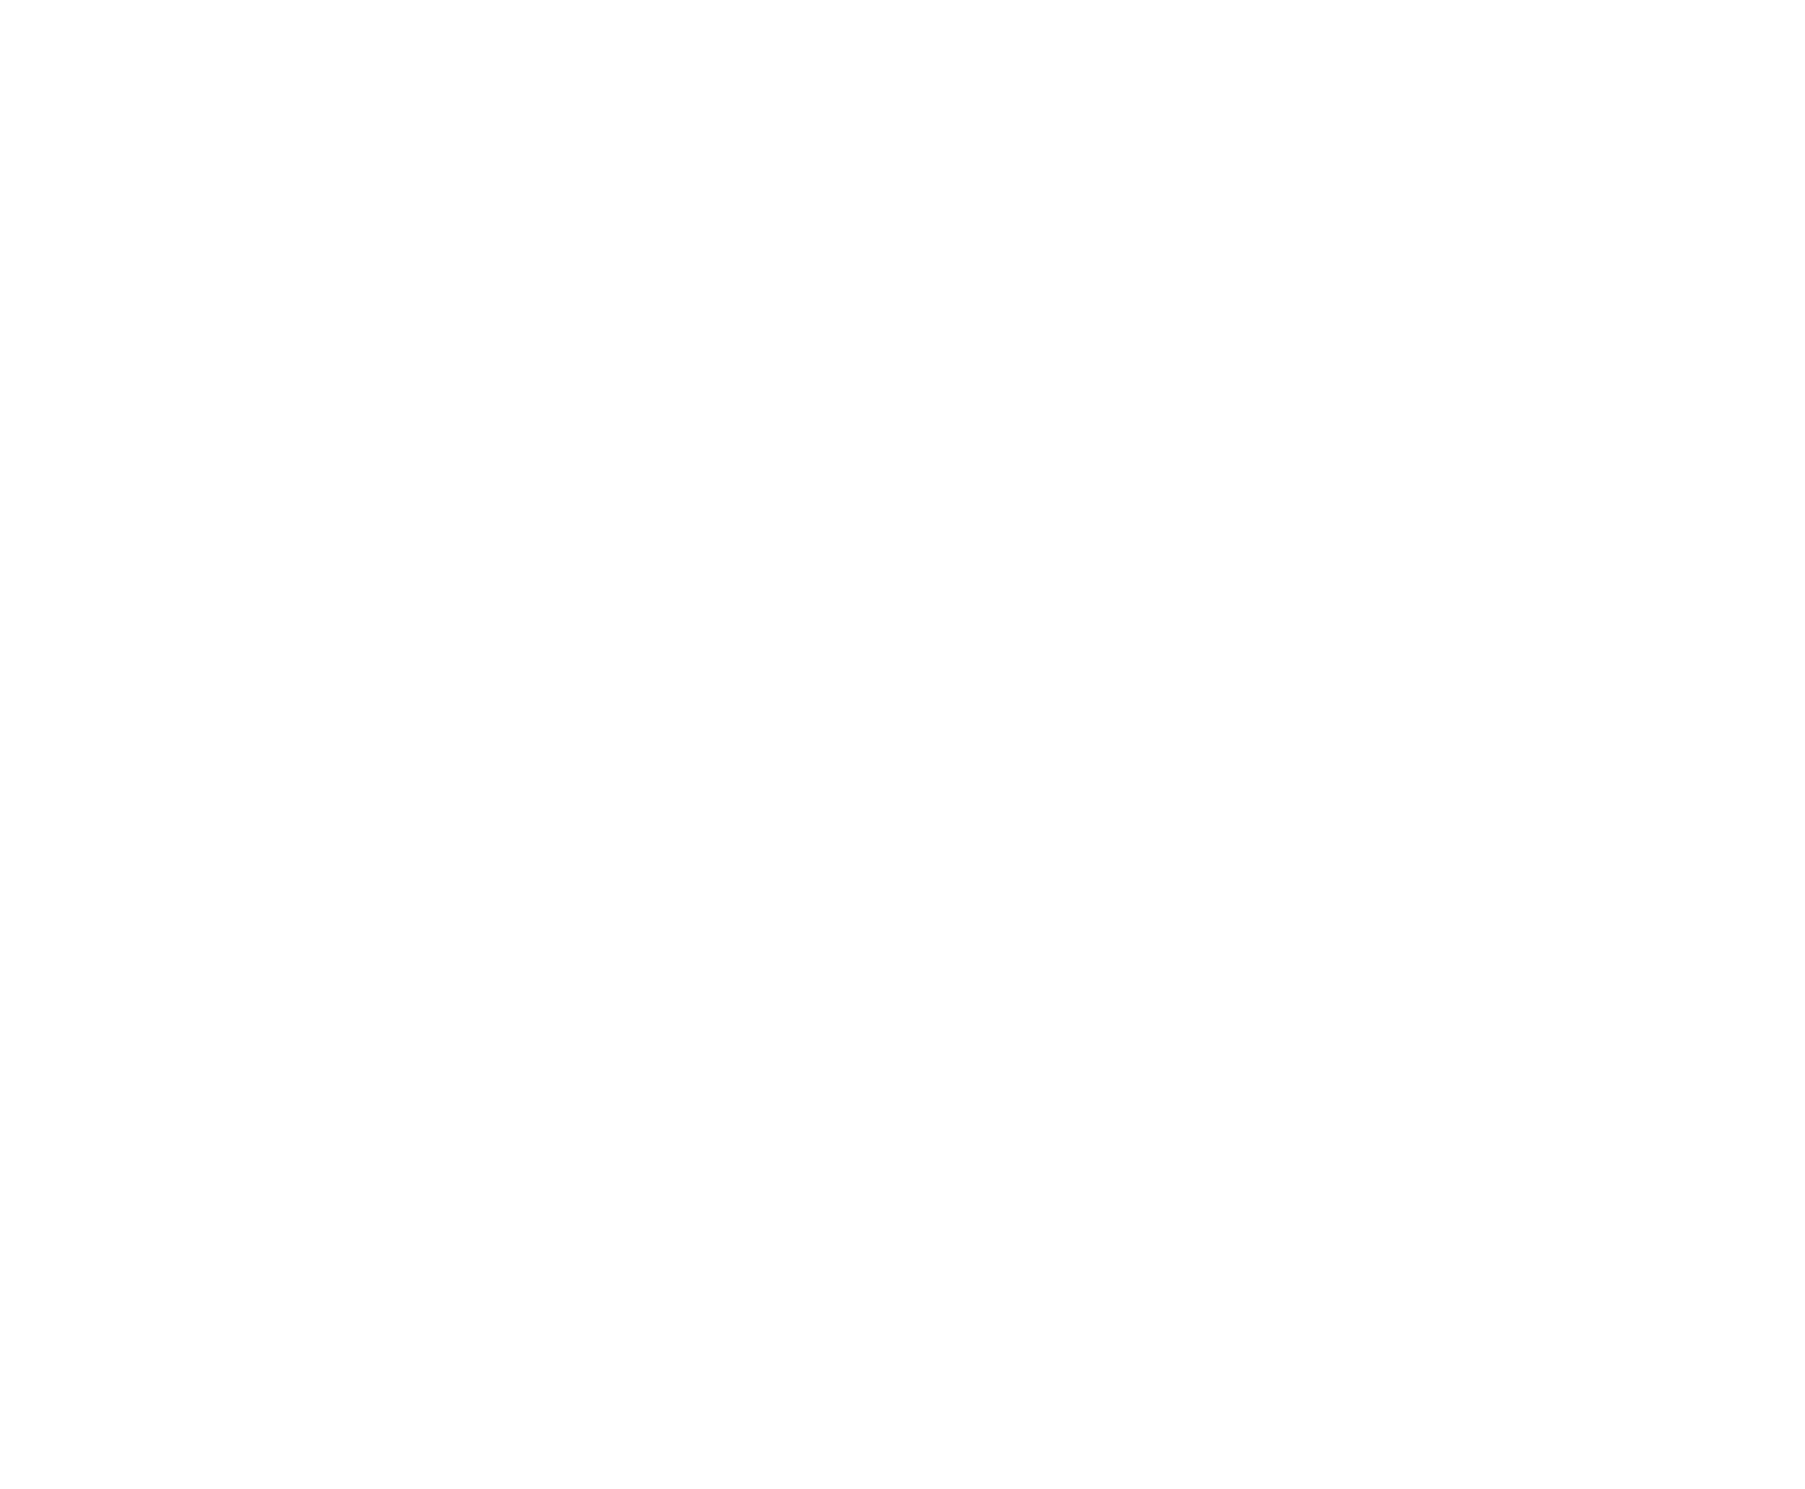 Securities Commission Malaysia Logo